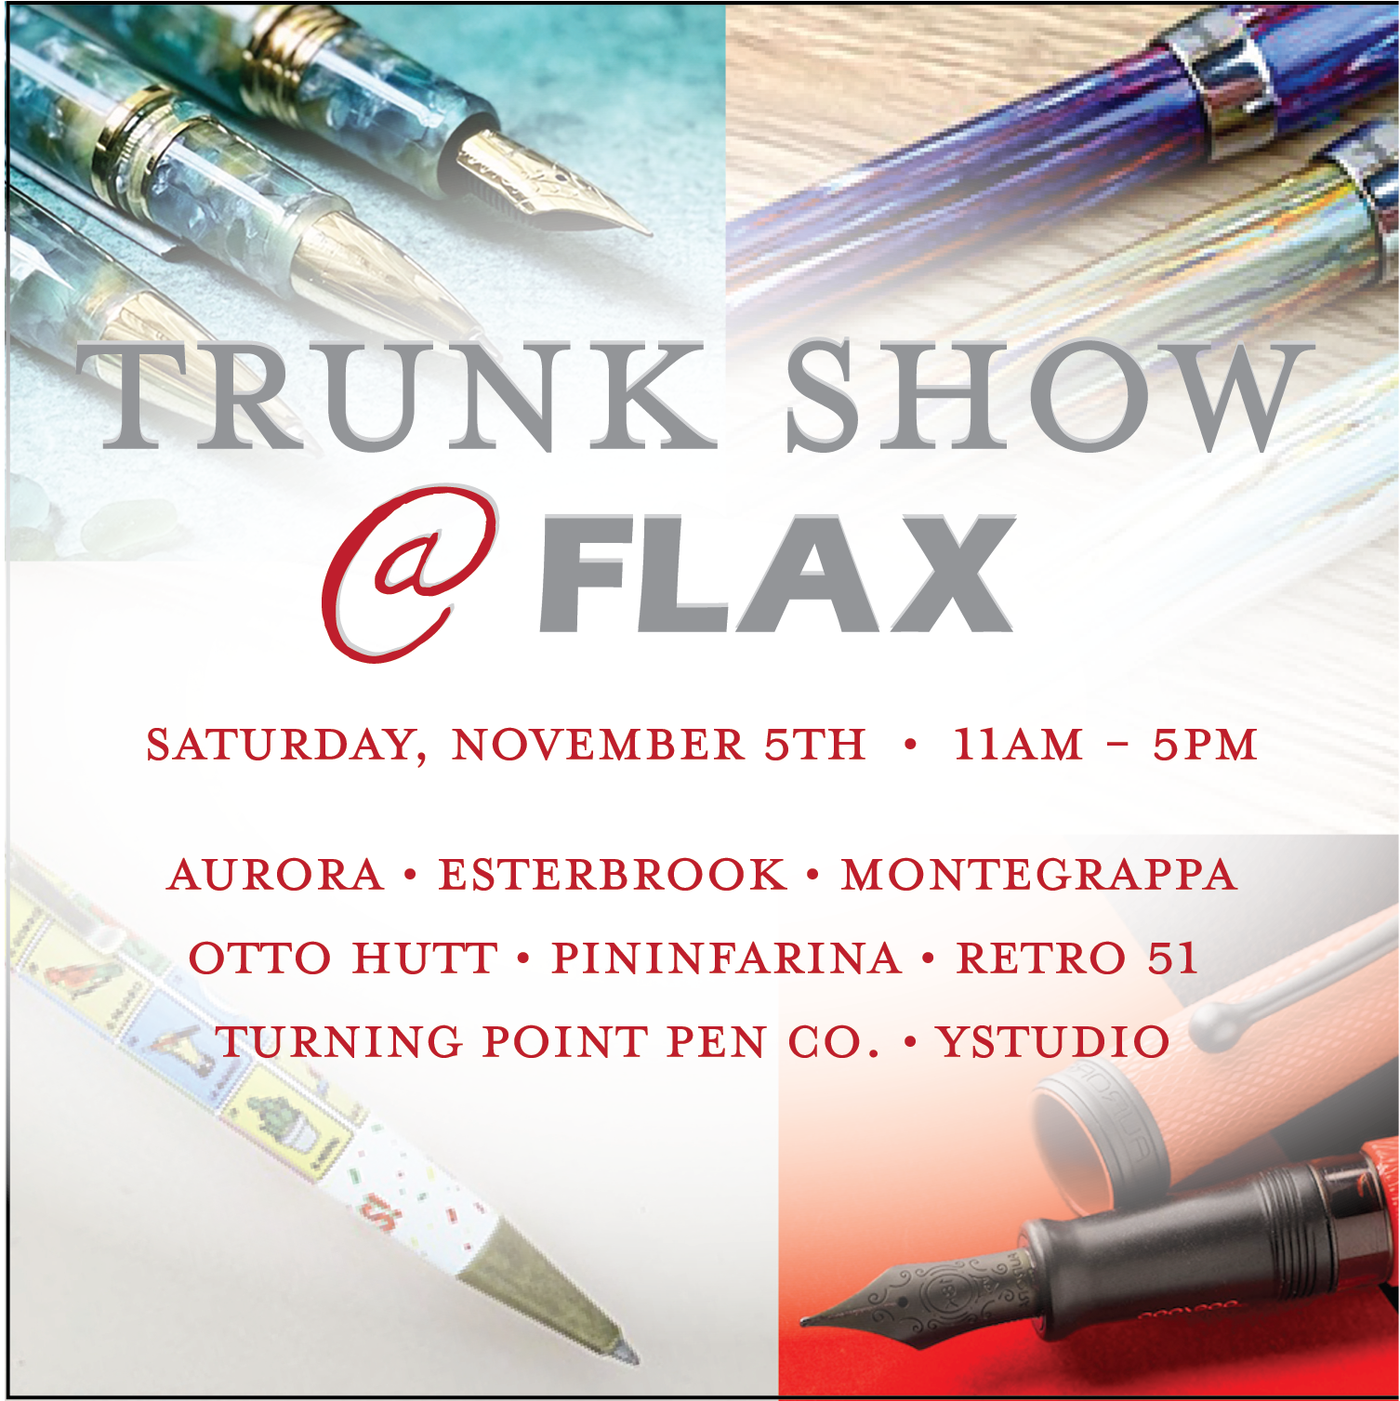 Fountain Pen Day Trunk Show - Pens, Nibgrinding, and More! (11/5/22)